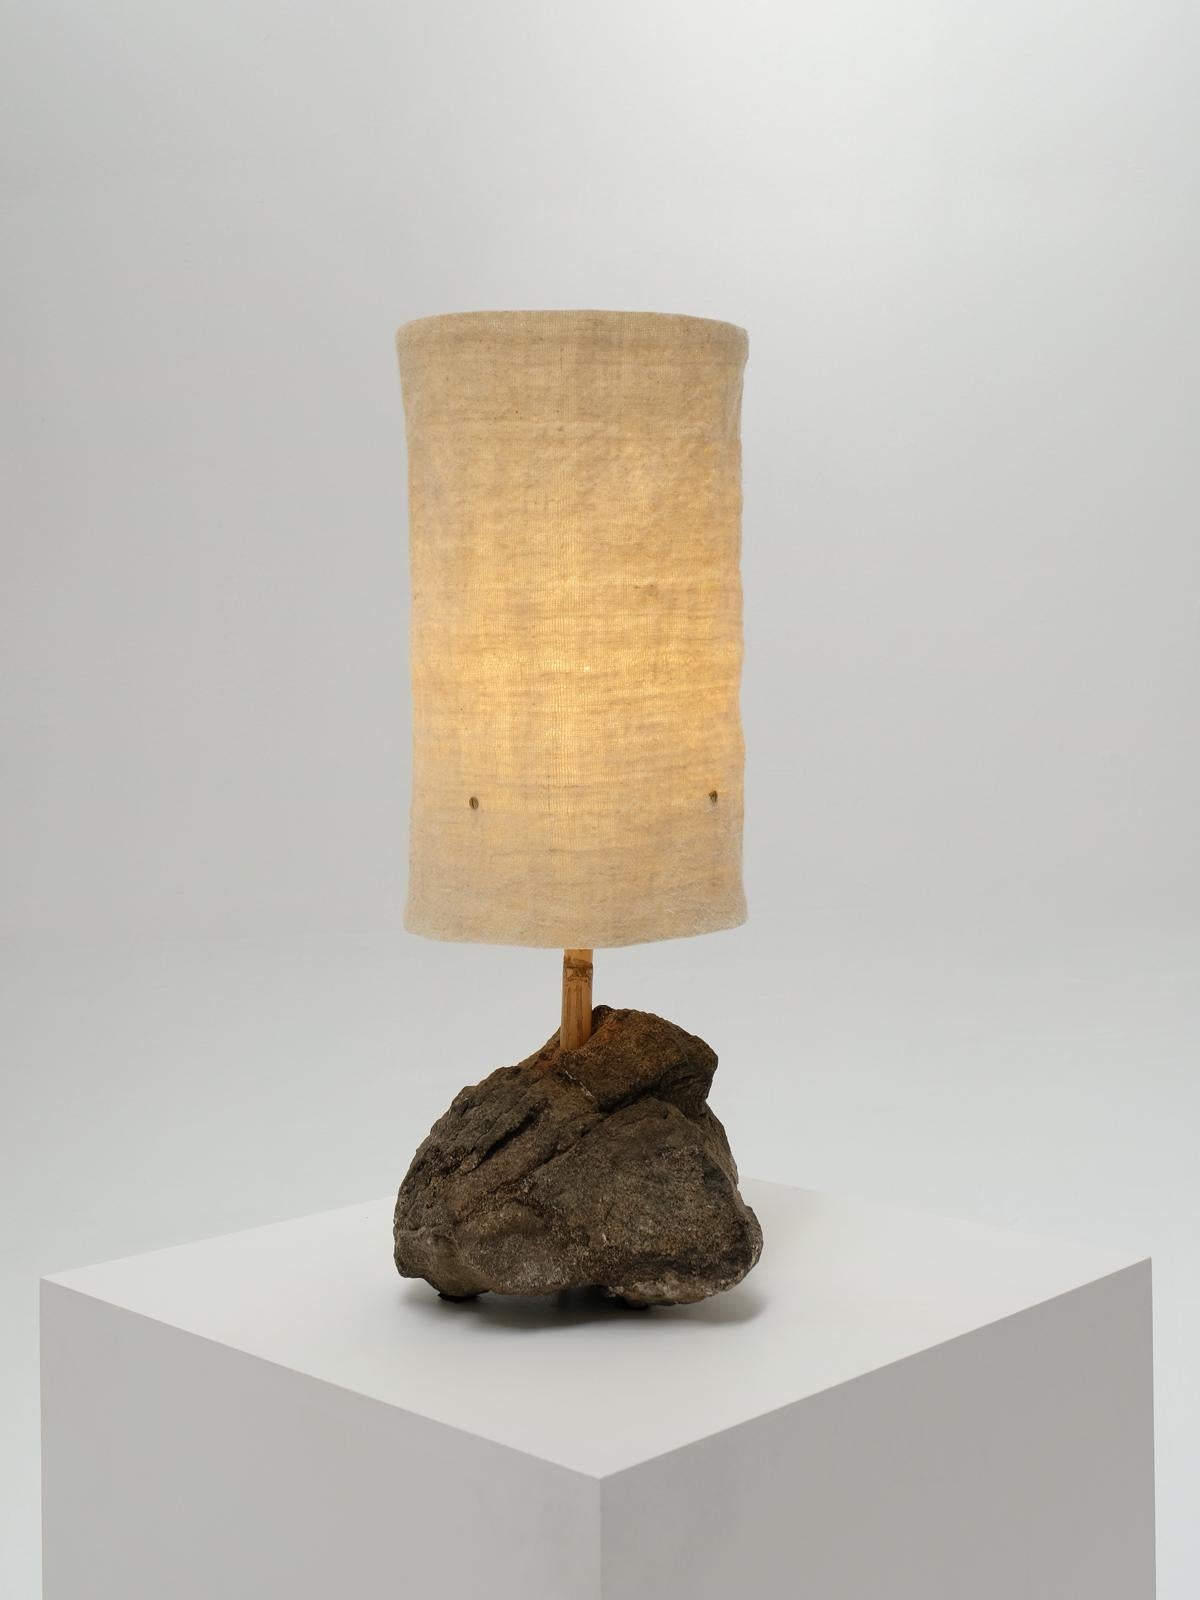 Hjra Table Lamp Large, Handspun, Handwoven wool Lampshade, Made of Rock & Reed For Sale 7